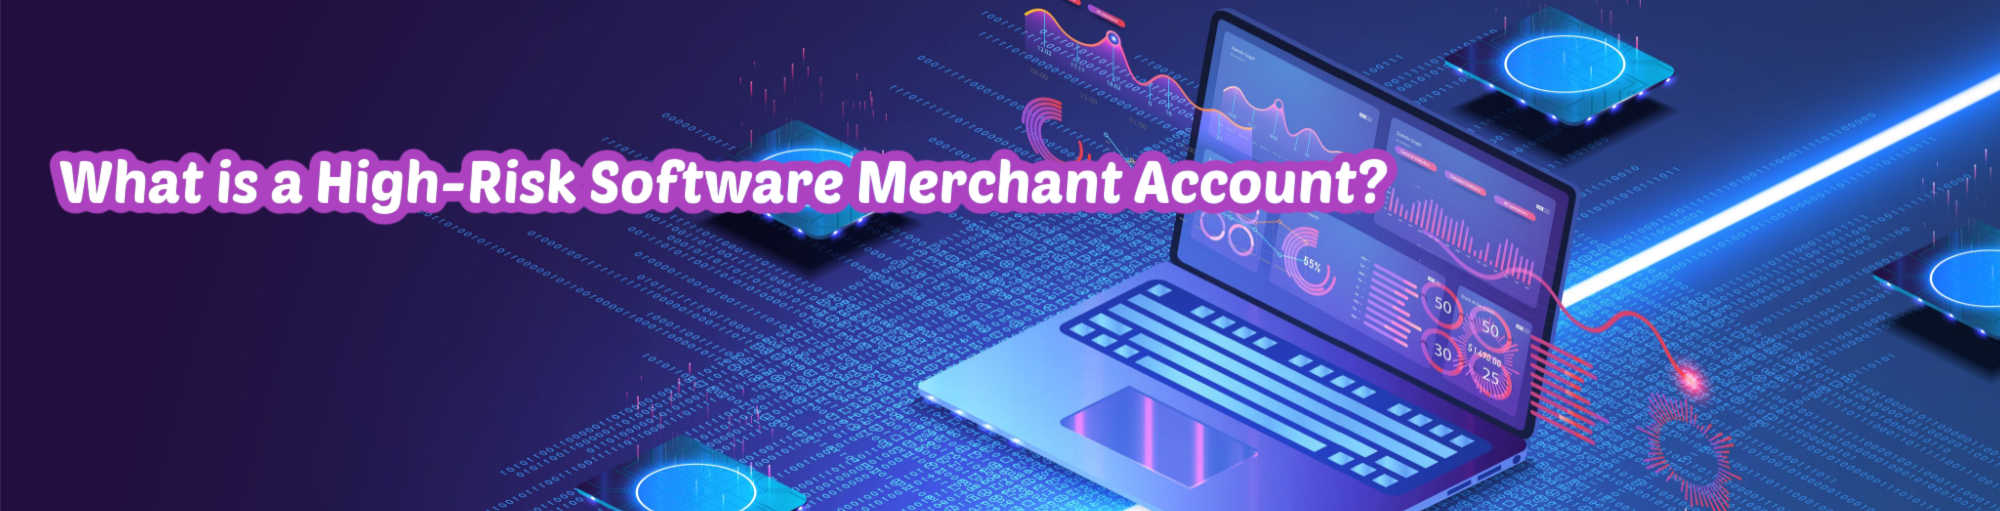 image of what is a high risk software merchant account